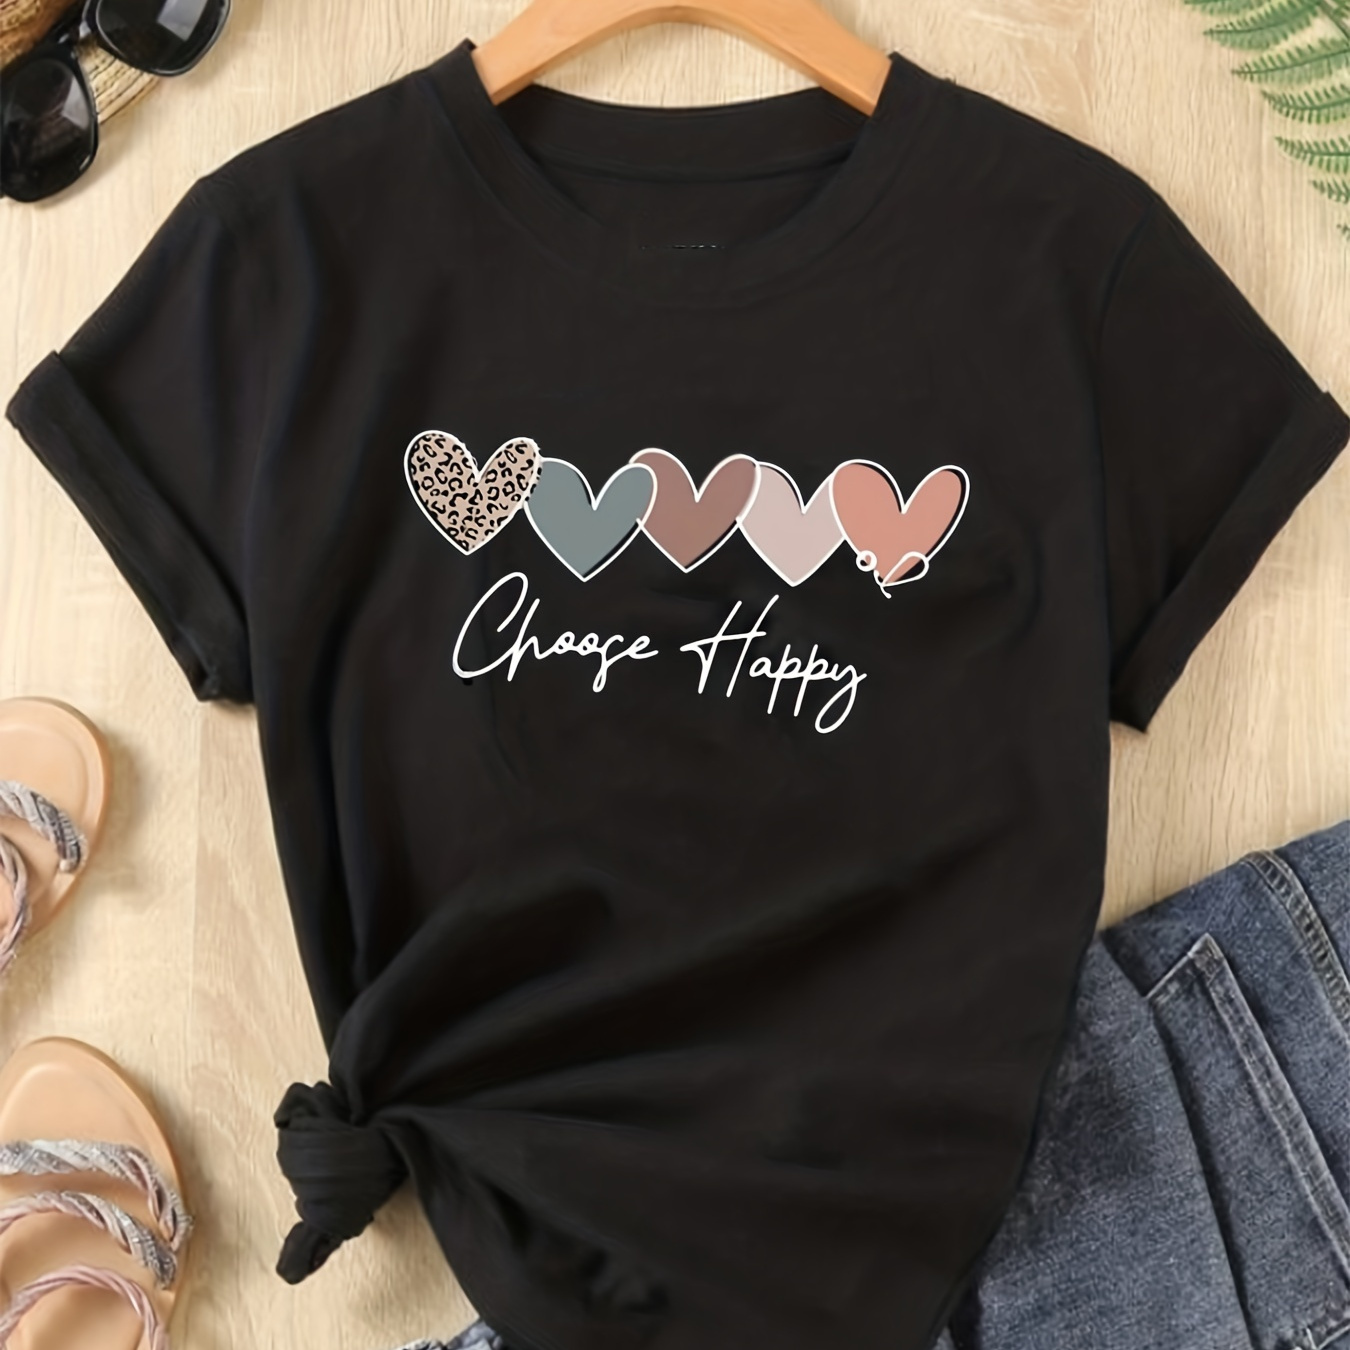 

Heart & Letter Print Crew Neck T-shirt, Casual Short Sleeve Top For Spring & Summer, Women's Clothing